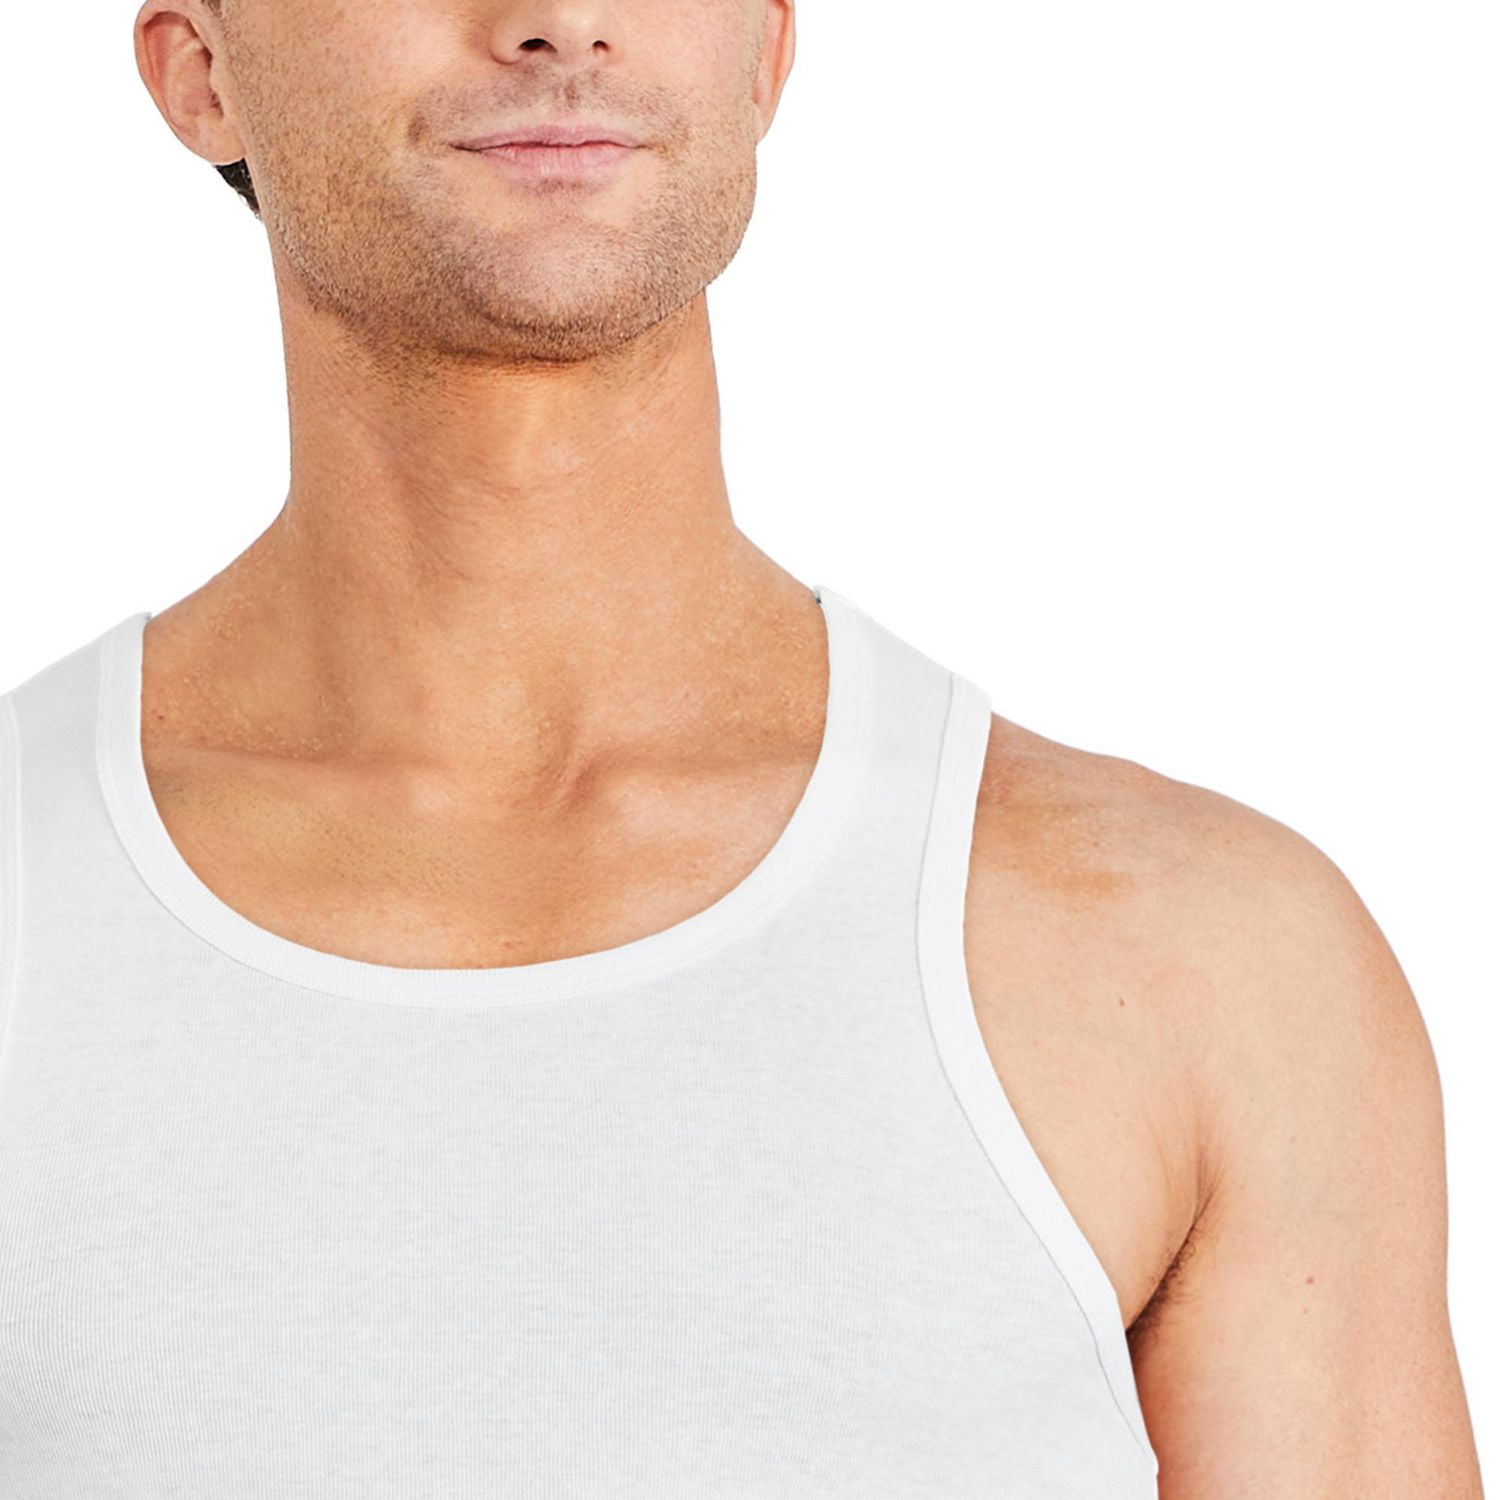 Mens 100% Cotton Tank Top A-Shirt Wife Beater Undershirt Ribbed Black 6  Pack (Black, X-Large) at  Men's Clothing store